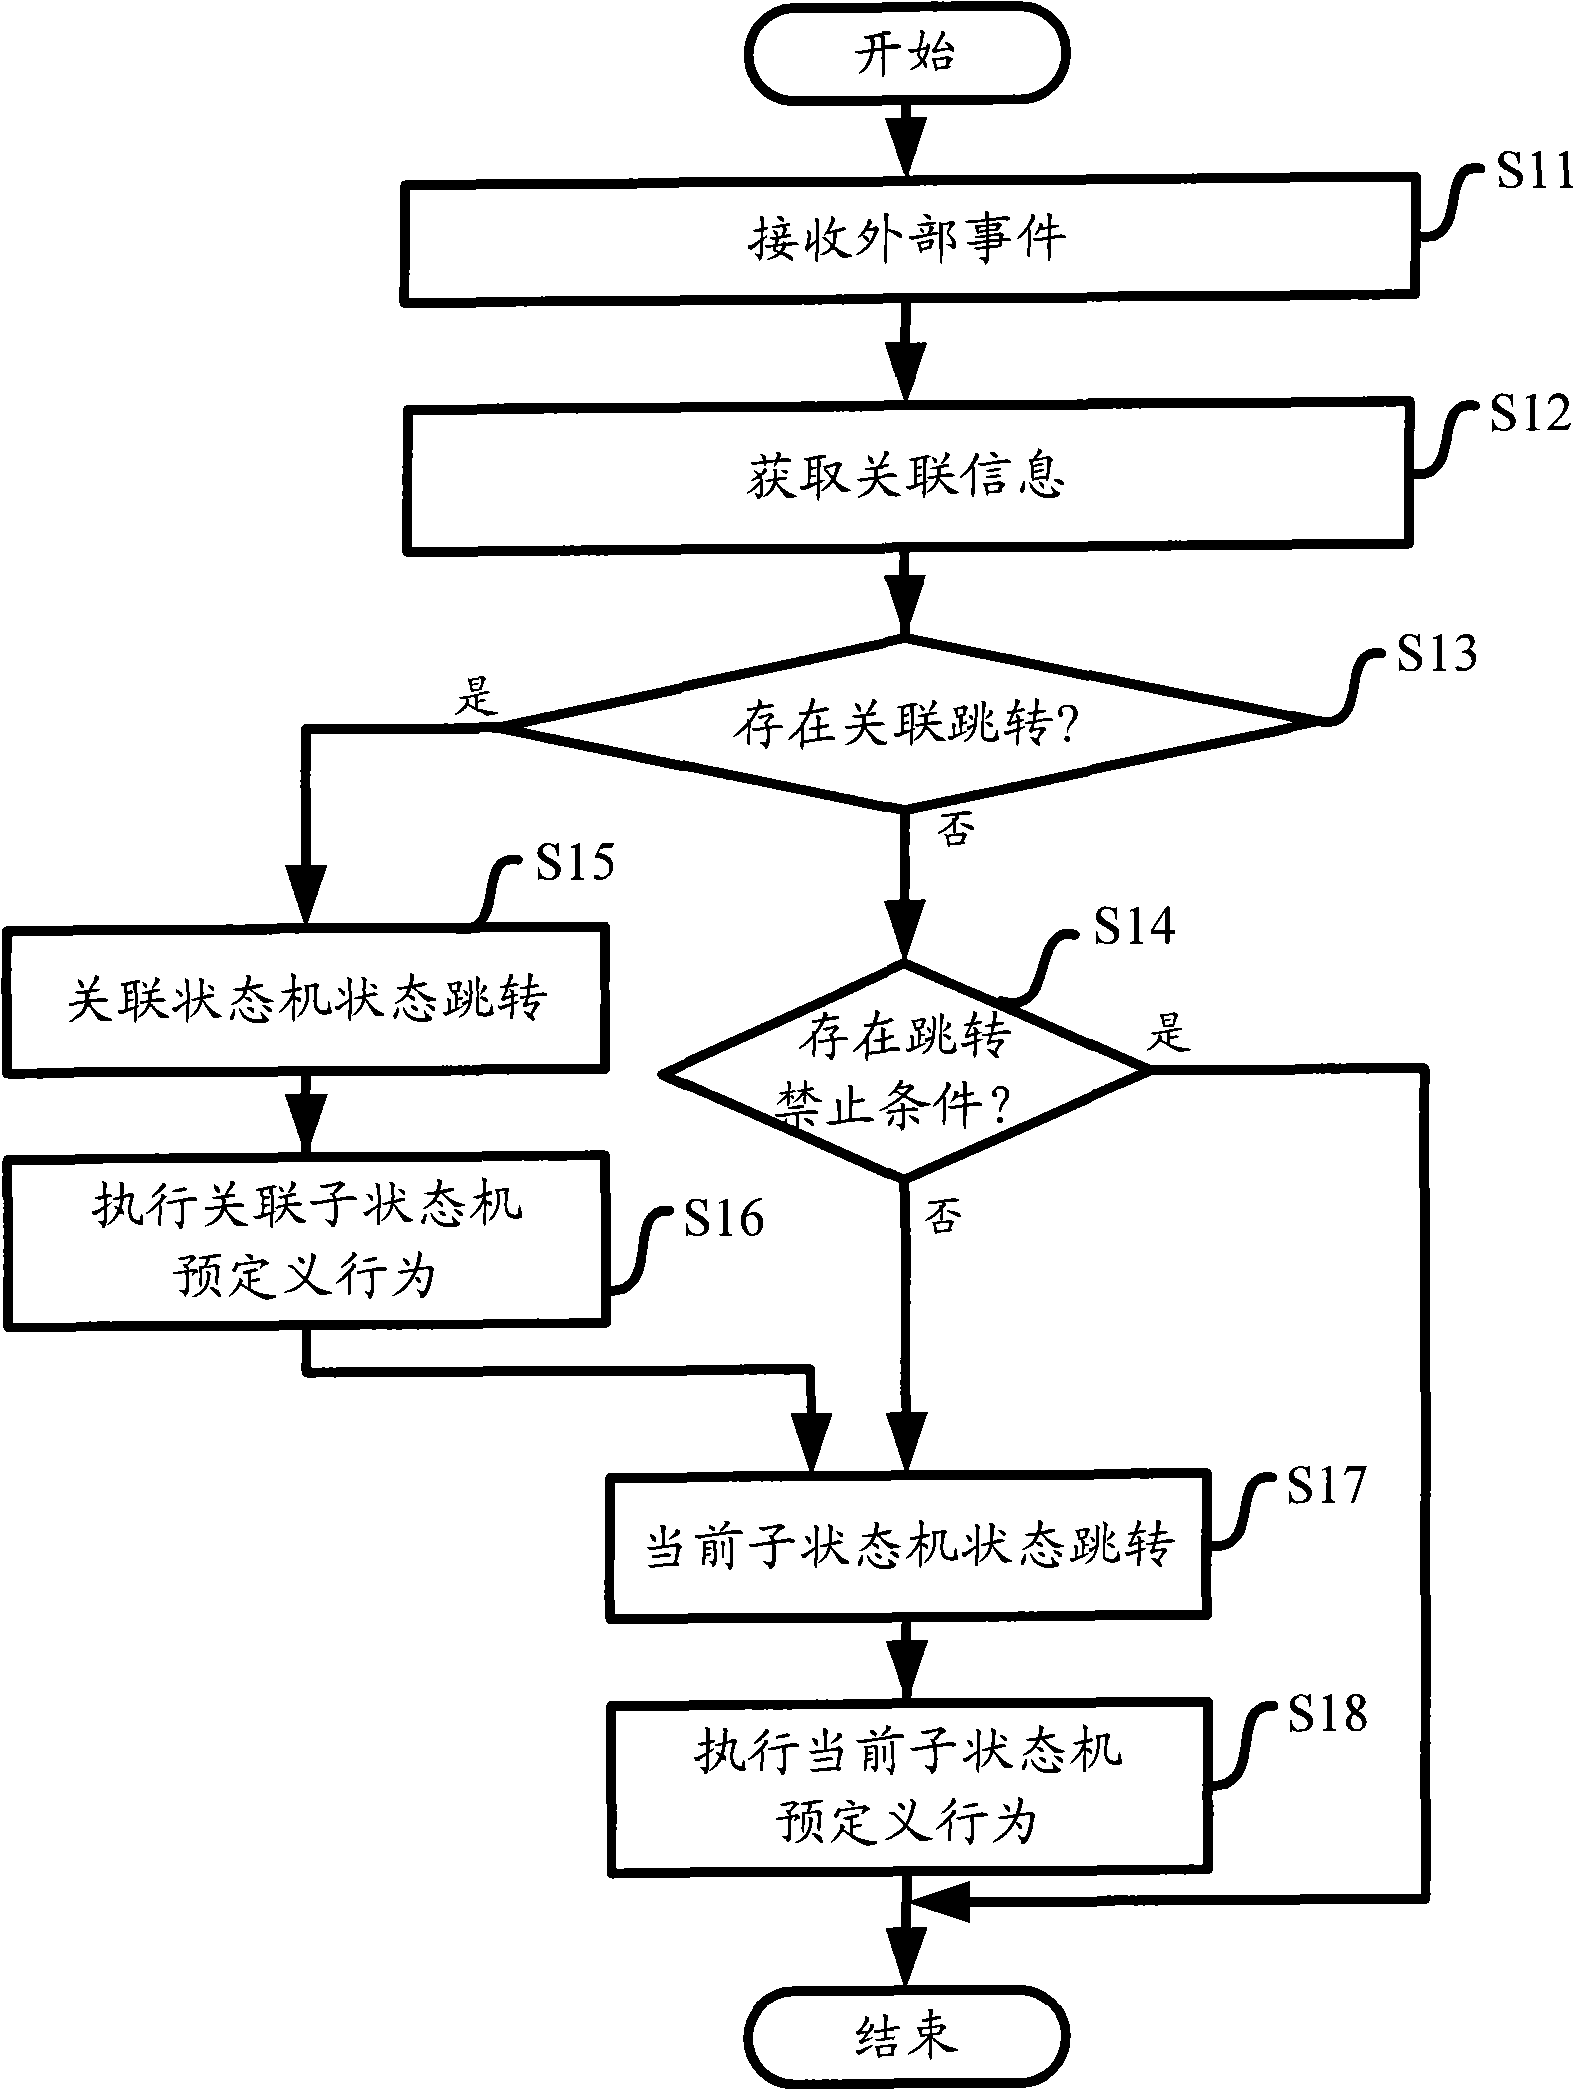 Device and method for controlling multiple function of communication apparatus by related parallel state machine